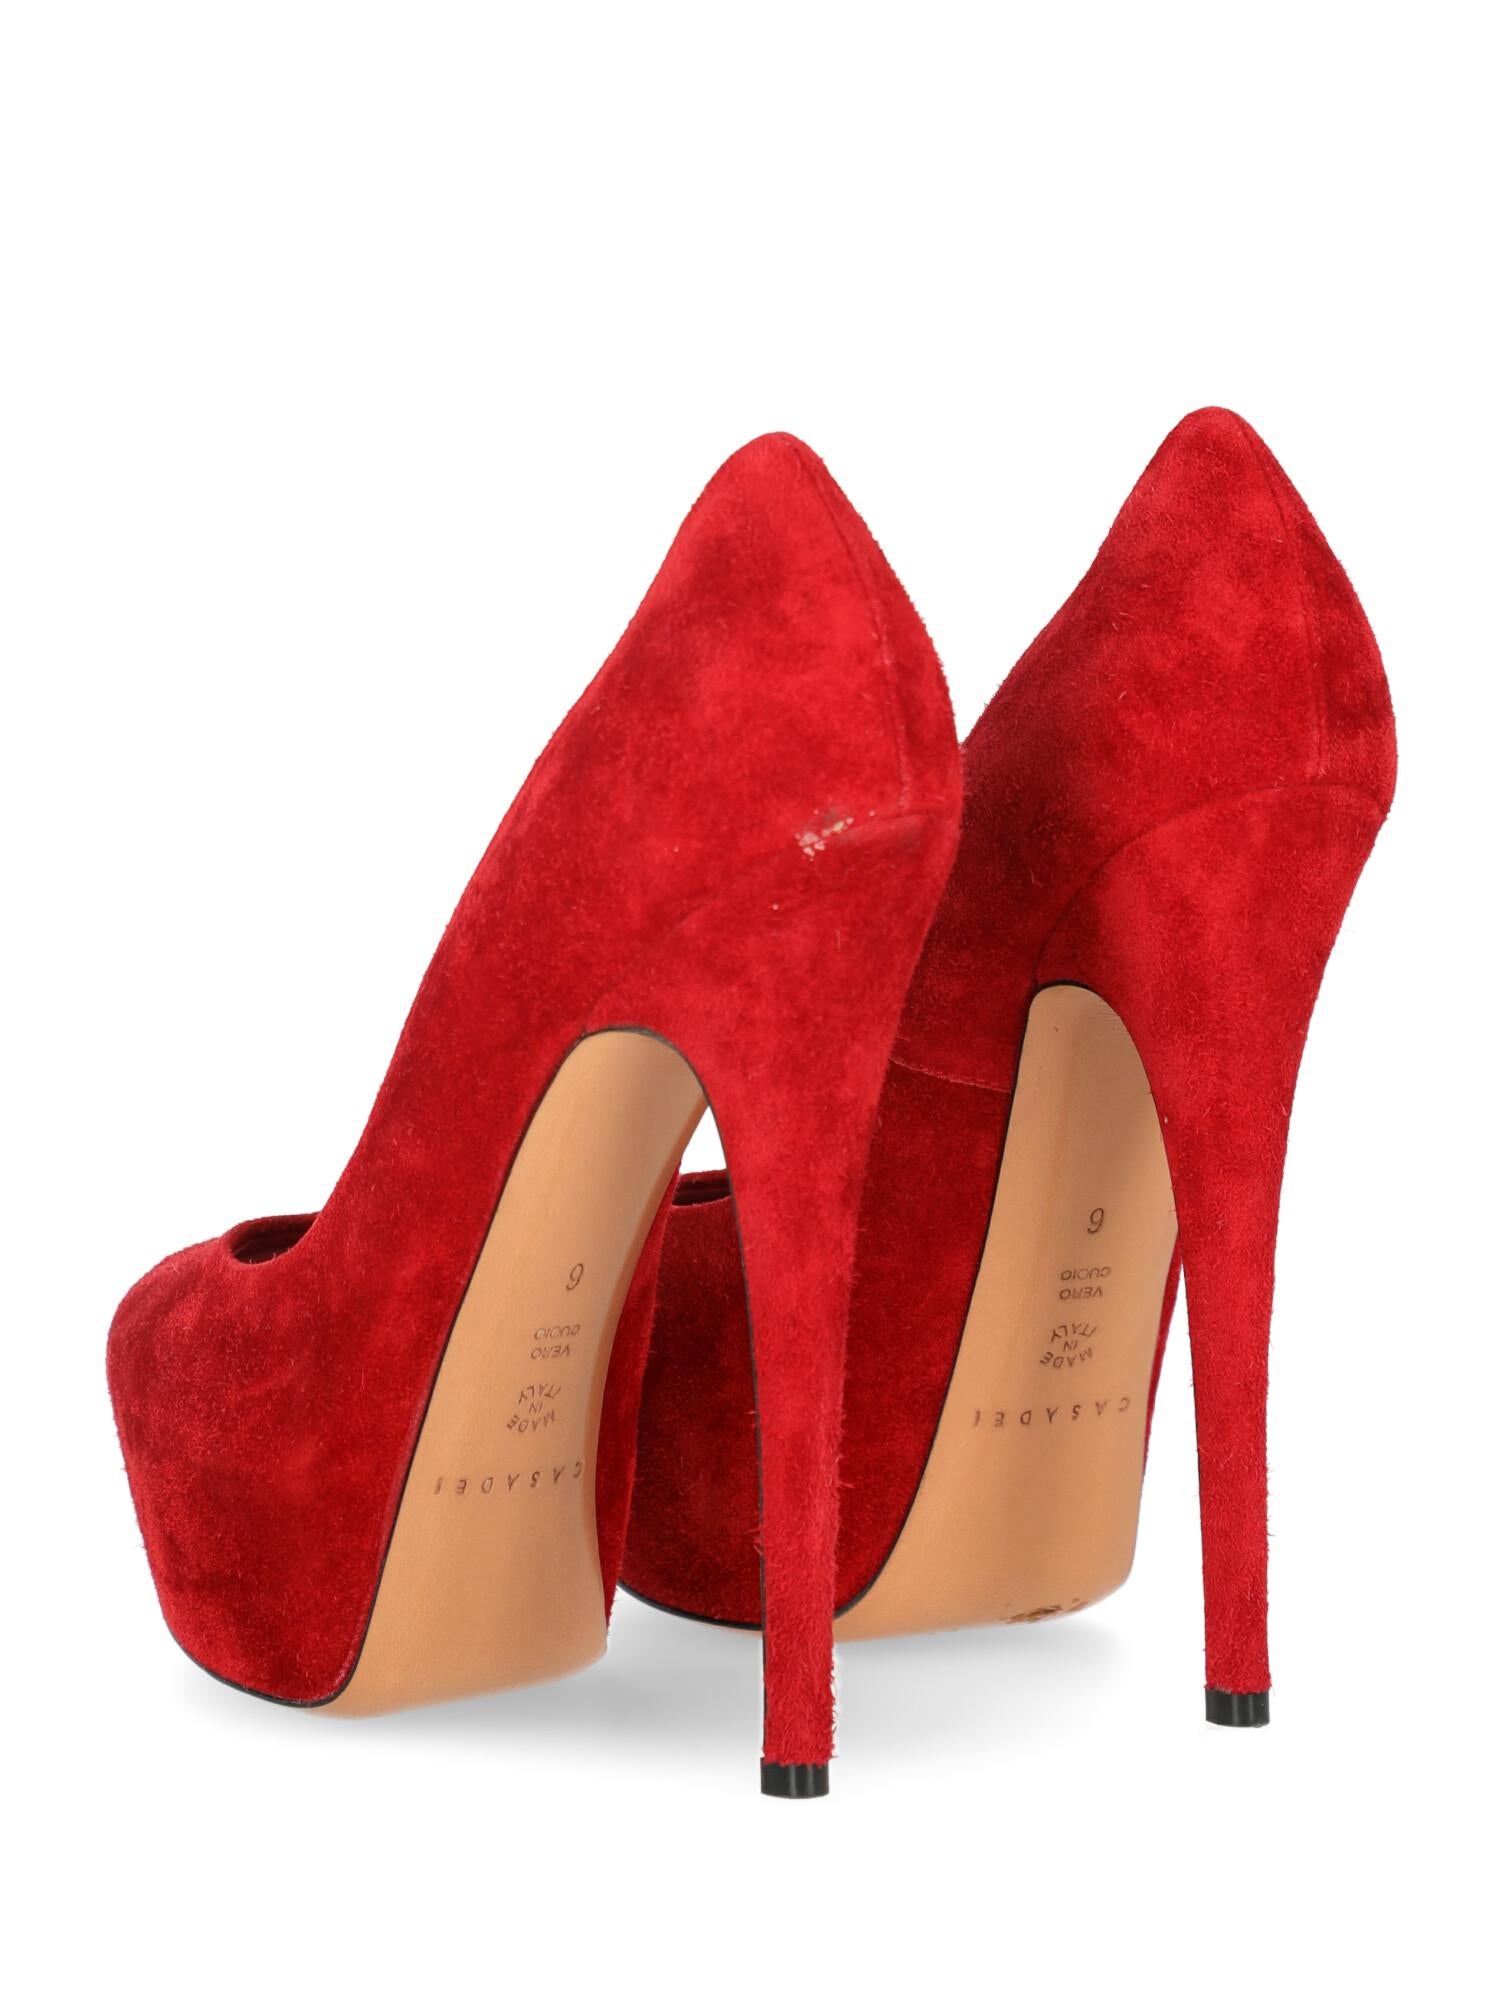 Casadei Woman Pumps Red Leather US 6 In Fair Condition For Sale In Milan, IT